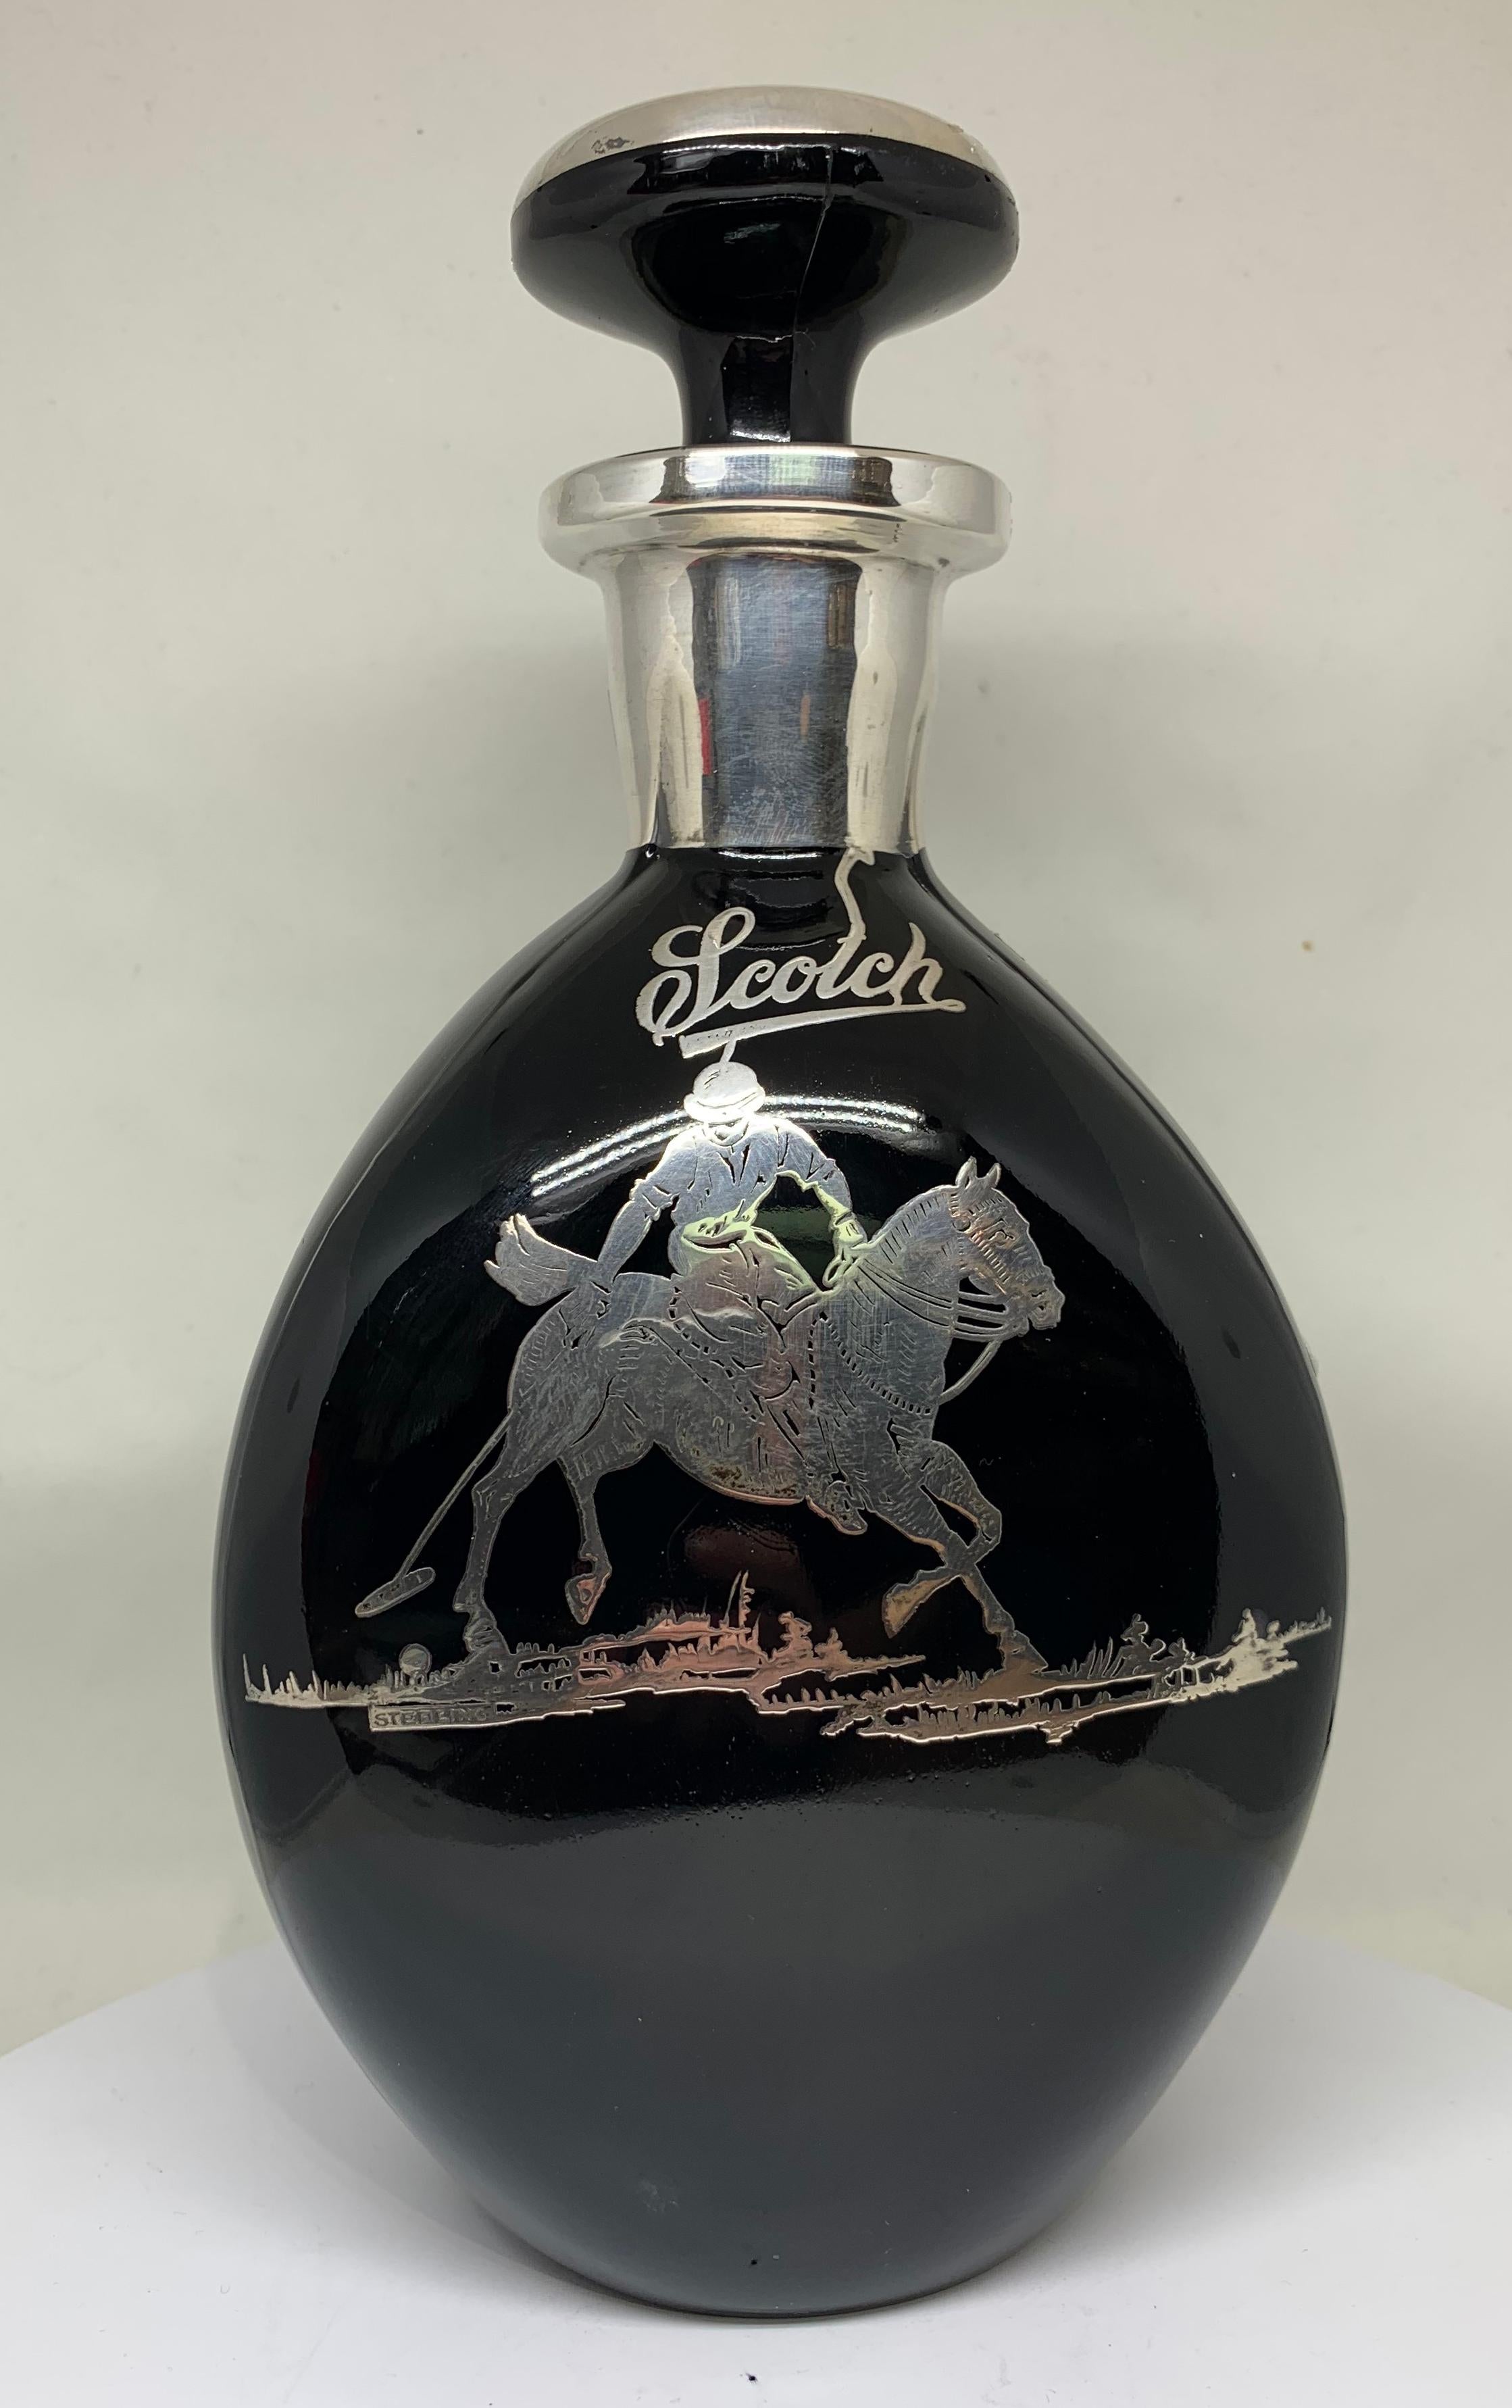 A rare and unusual Polo themed Obsidian glass and inlaid sterling silver Scotch decanter, American, circa 1930s.

Having a triangular 